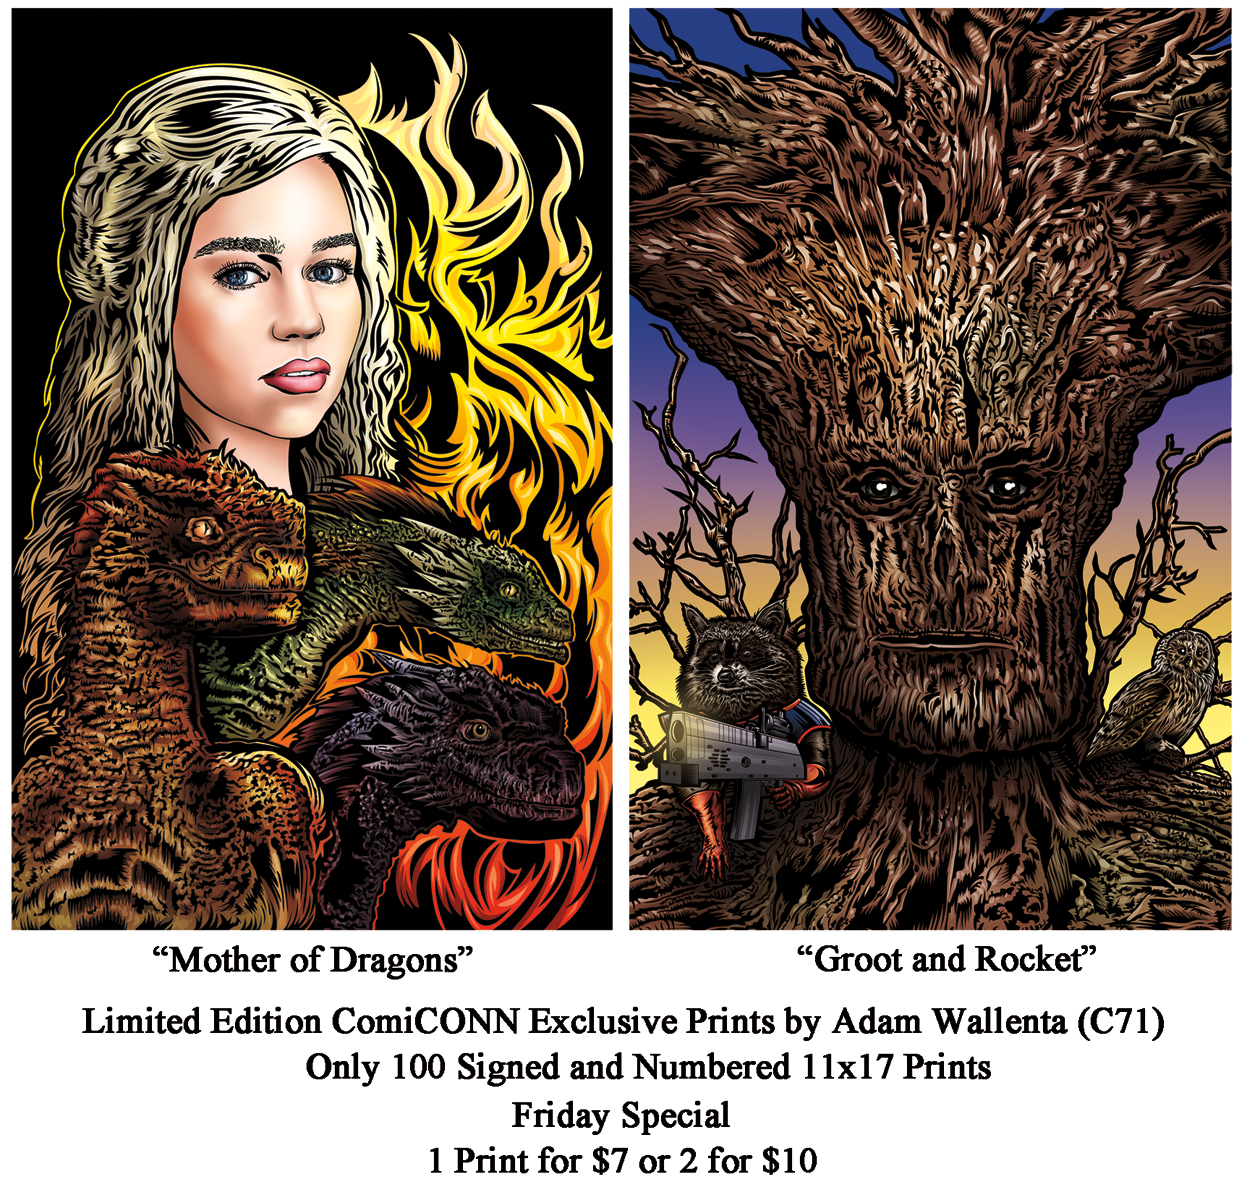 "Mother of Dragons" and "Groot and Rocket" by Adam Wallenta will be available at table C71 while supplies last.